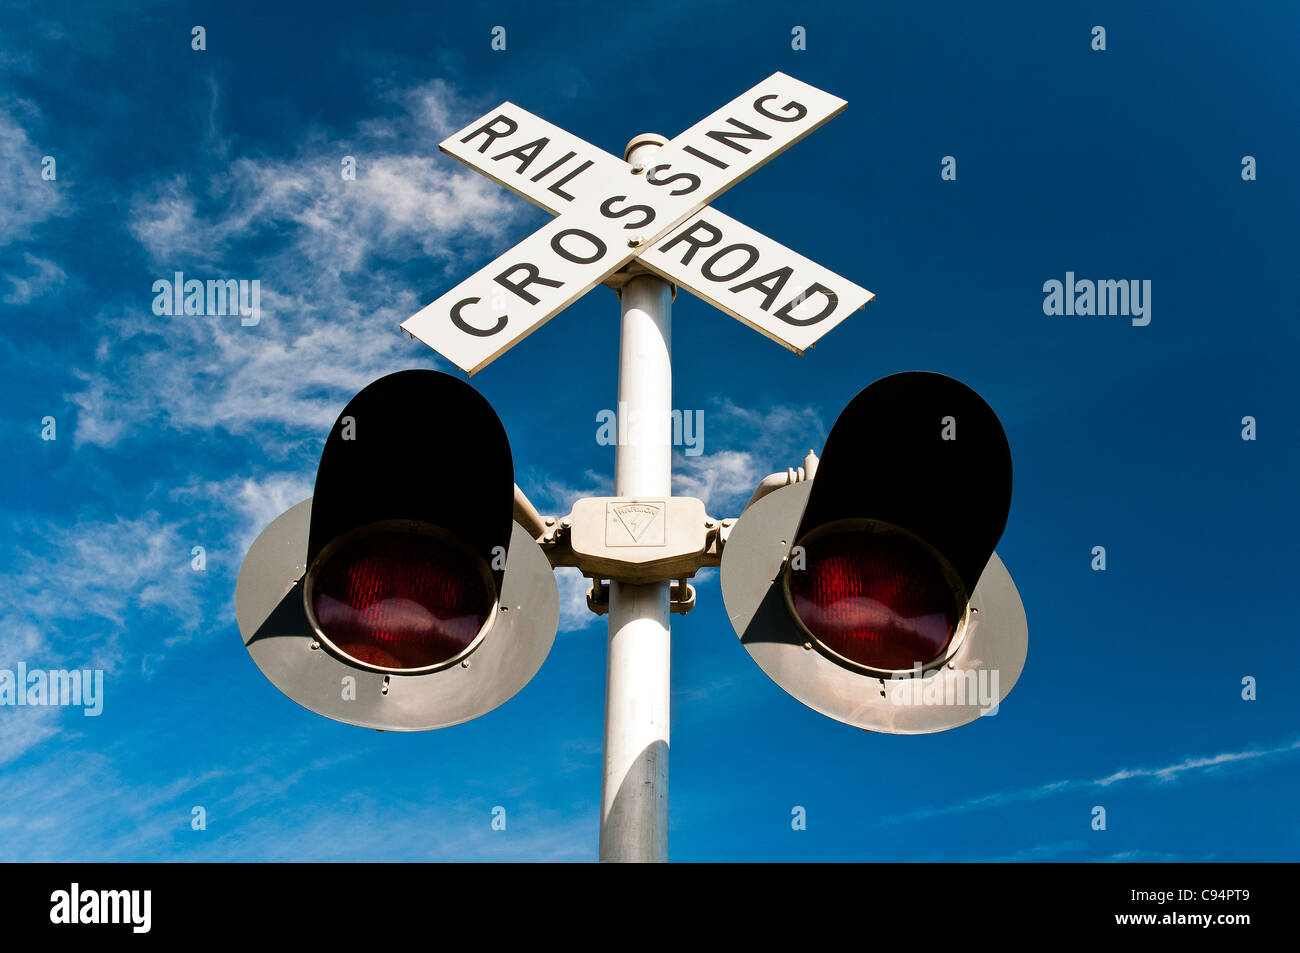 American Railroad crossing, Seattle, Washington, USA Banque D'Images